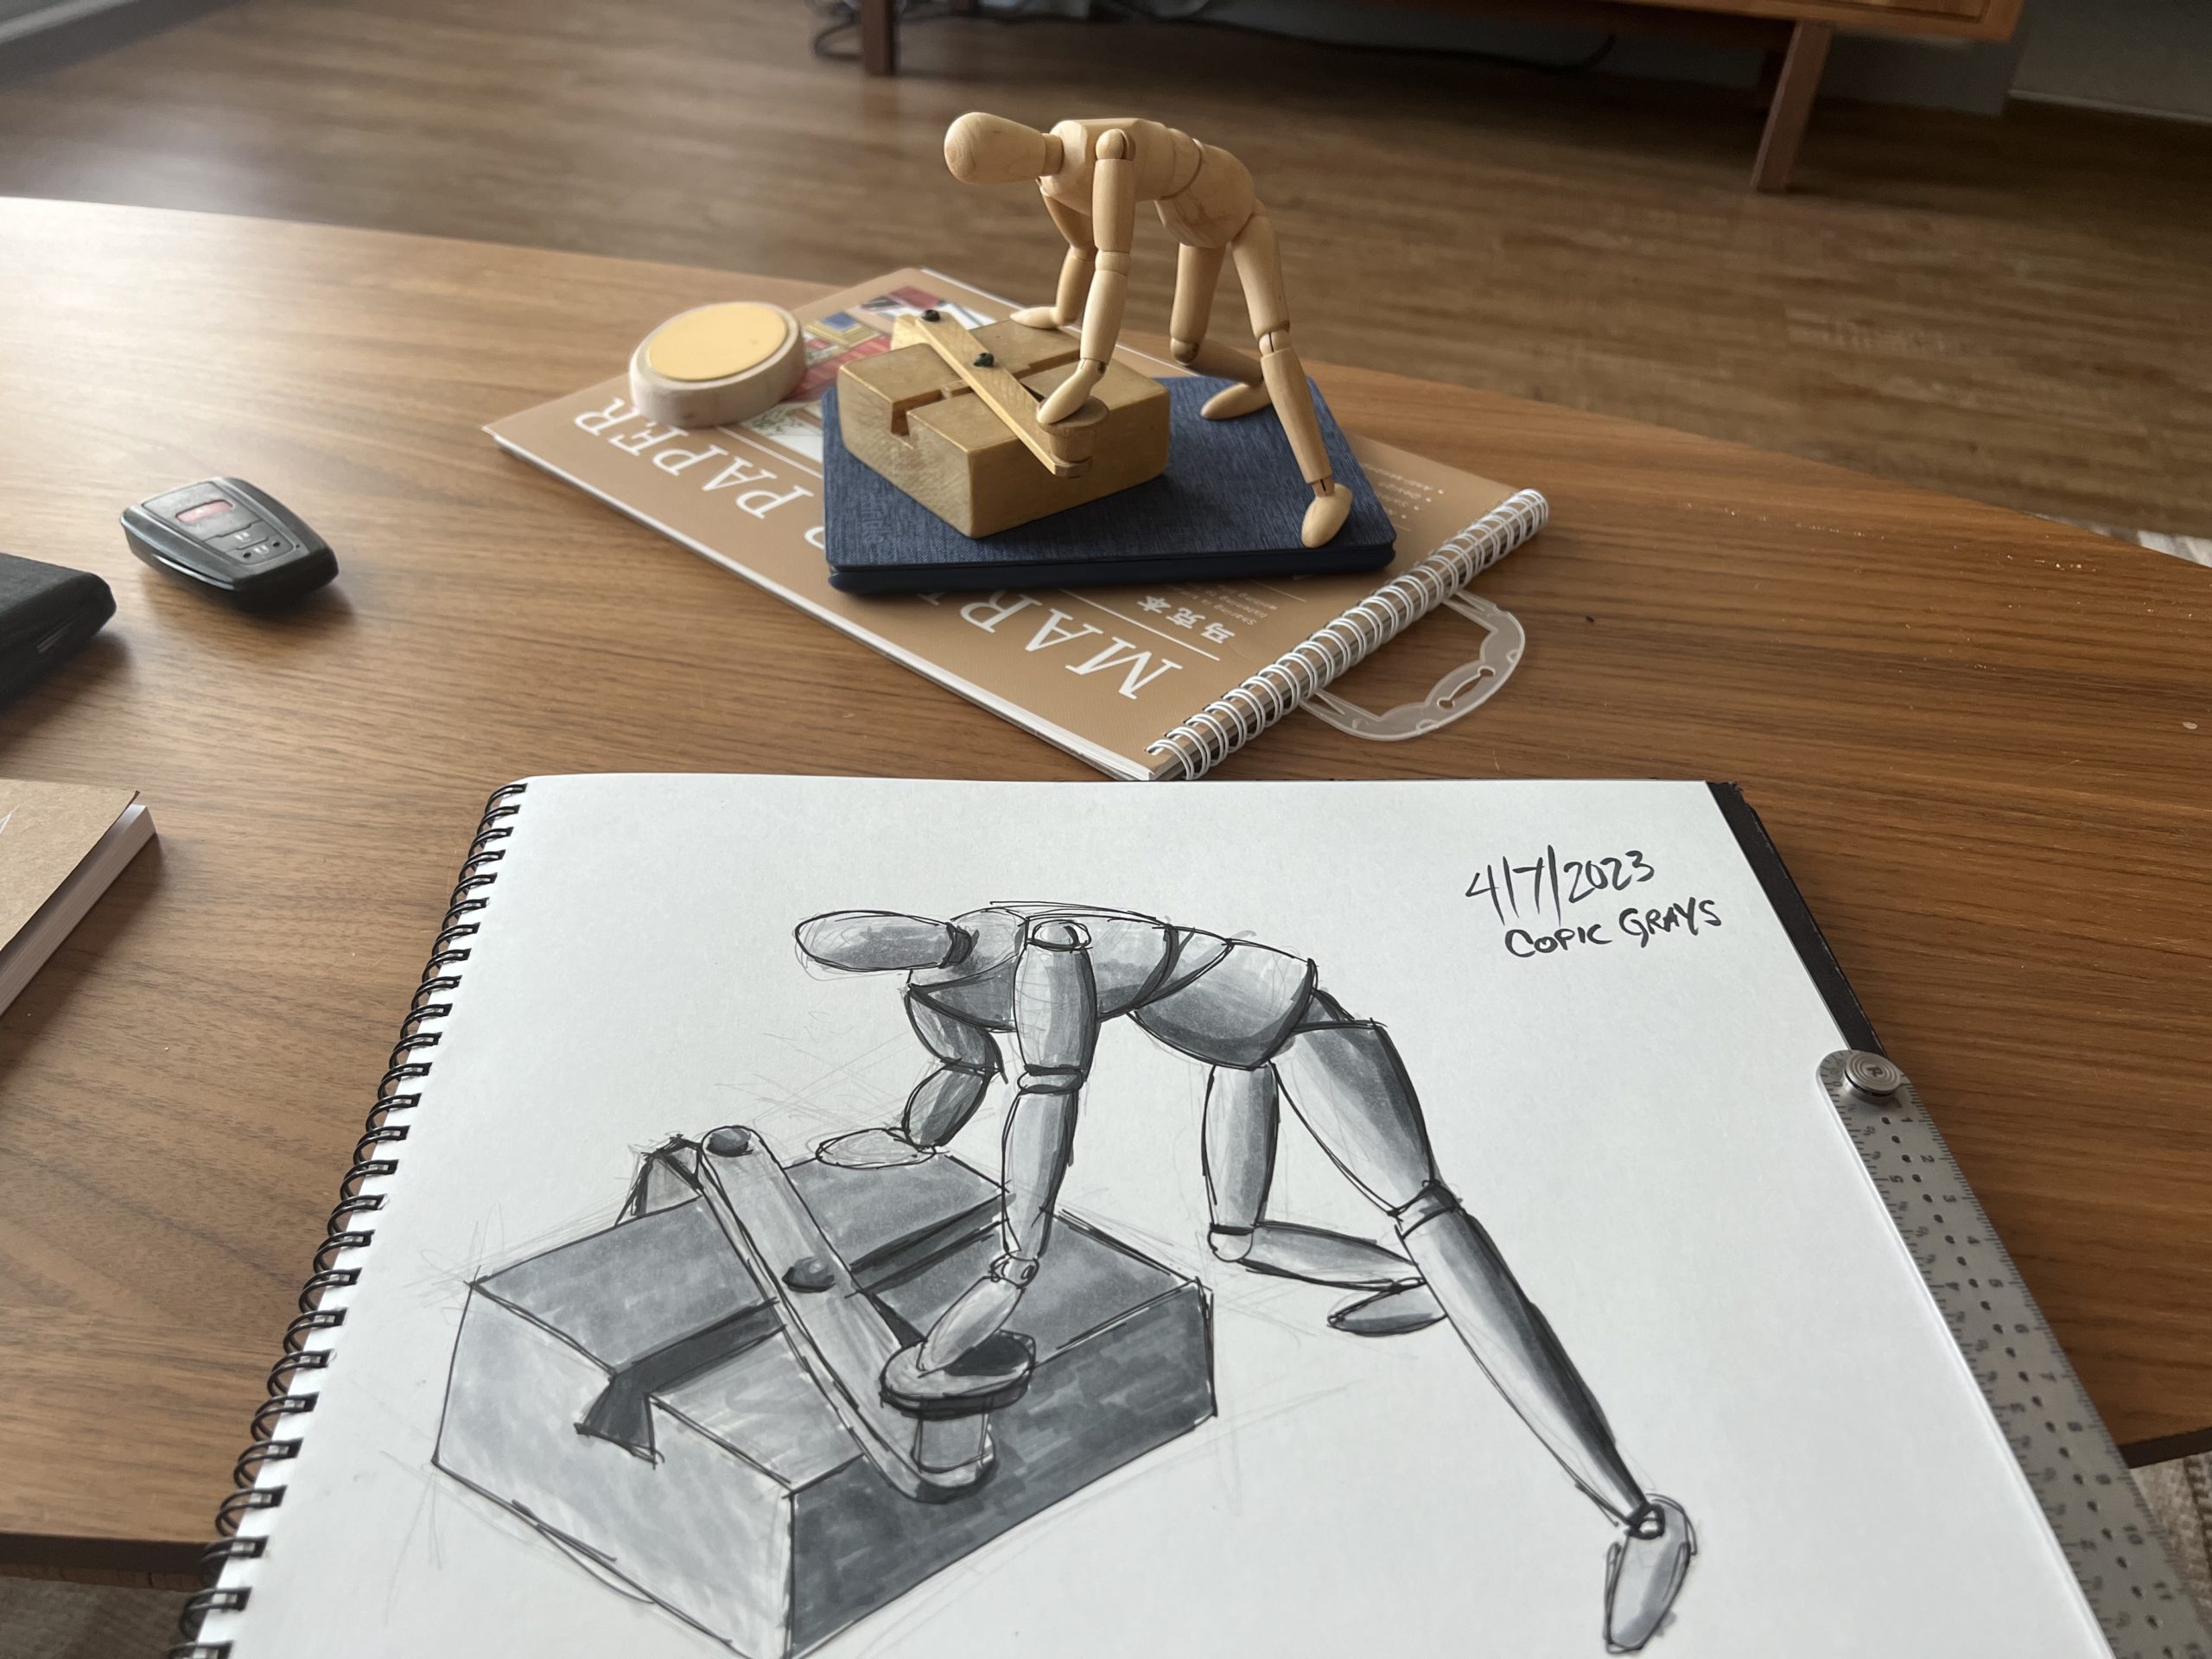 A sketch of a small wooden figure with a wooden do nothing machine (in front of the actual figure and machine)